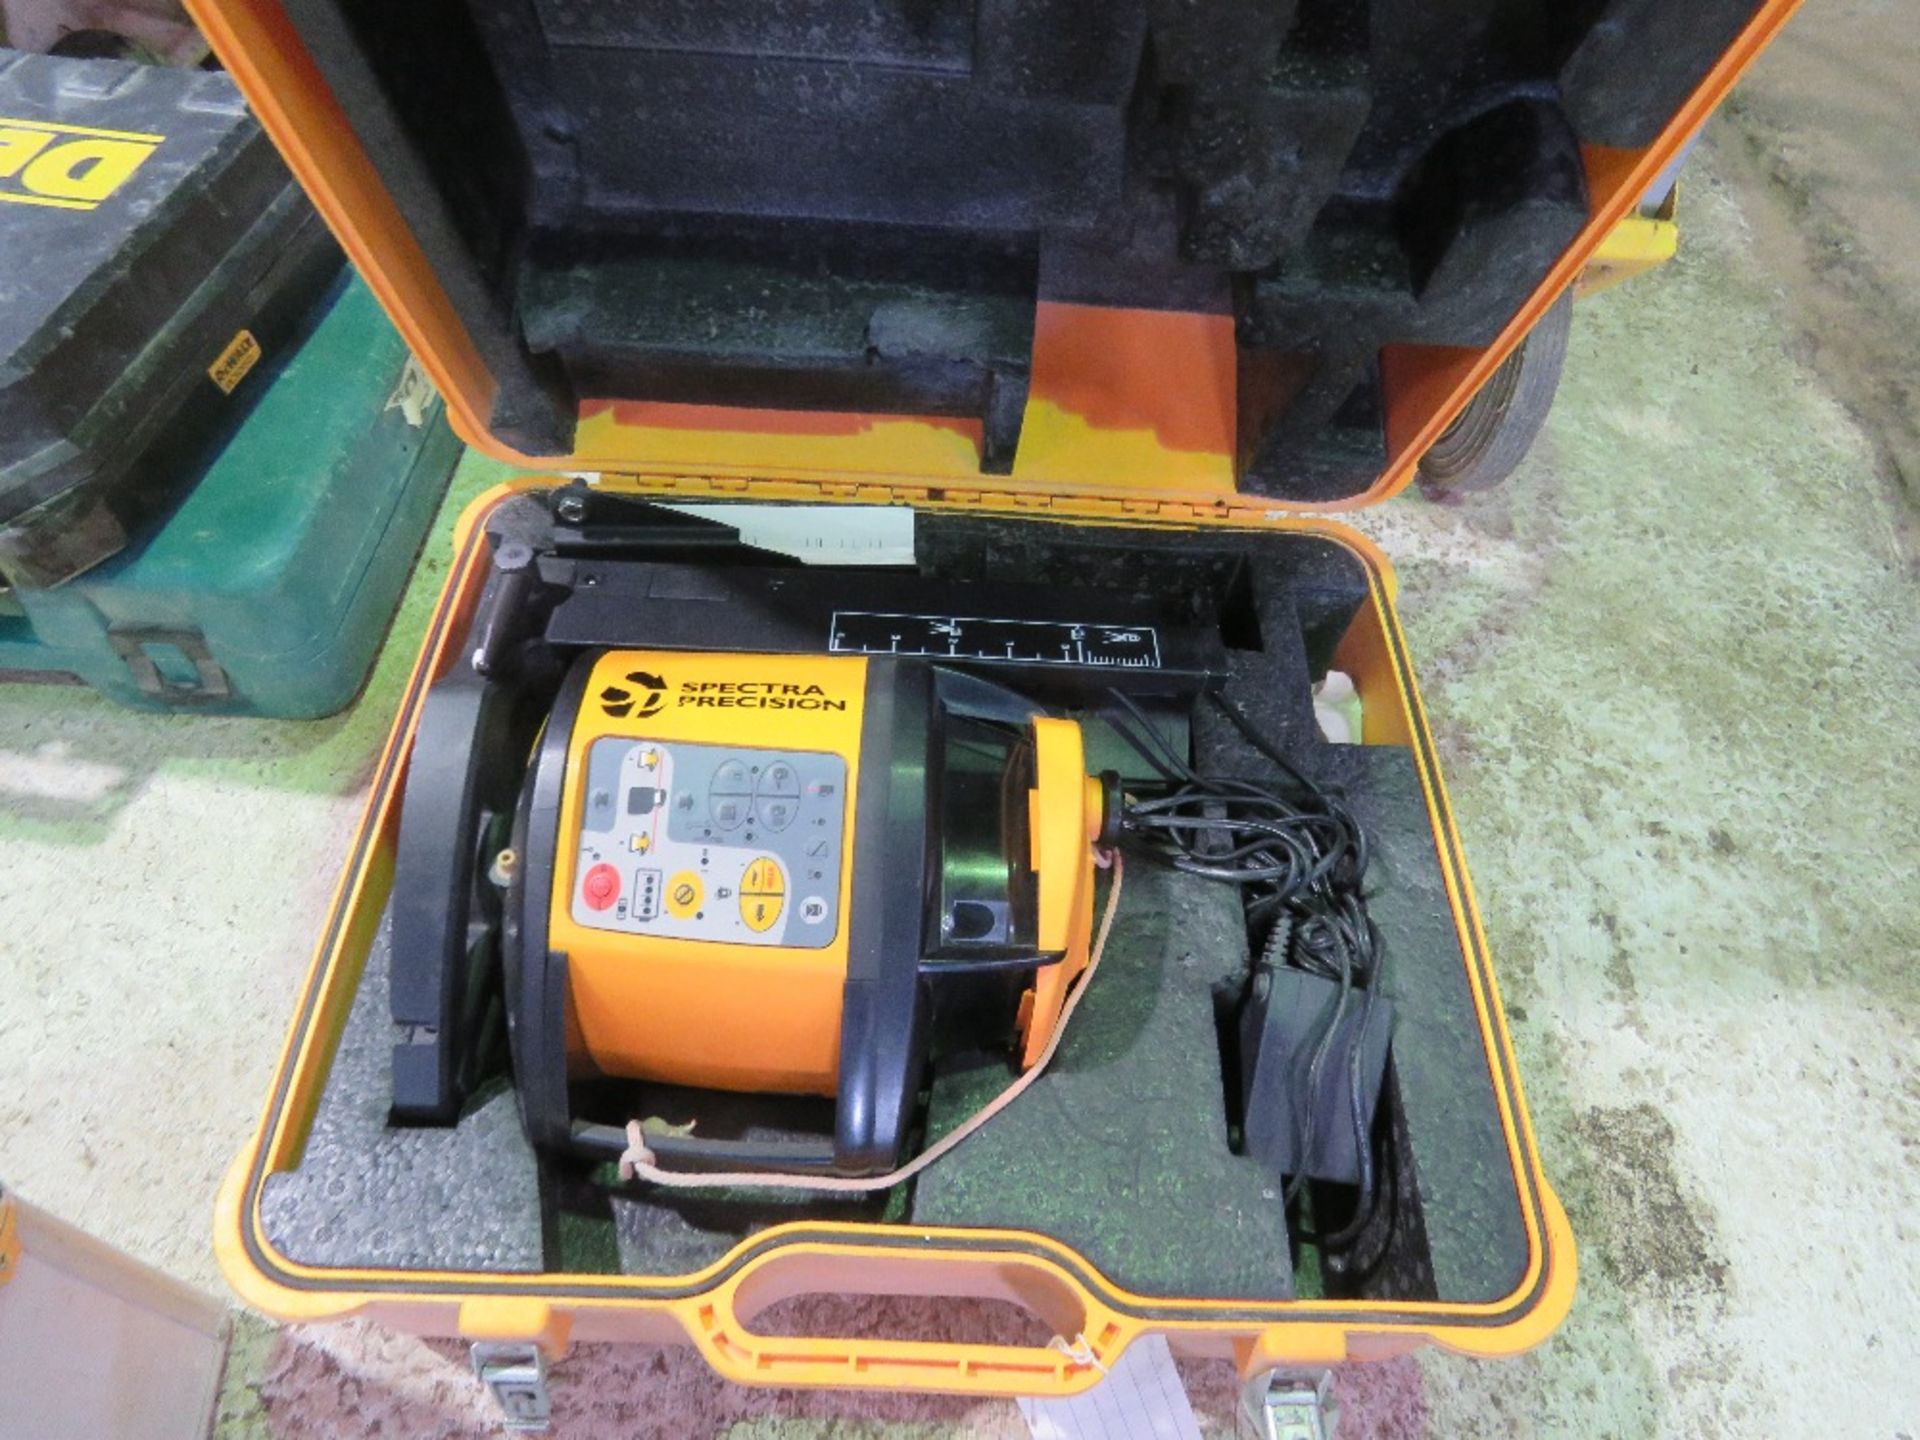 SPECTRA PRECISION LASER LEVEL SET IN A CASE. DIRECT FROM LOCAL COMPANY.